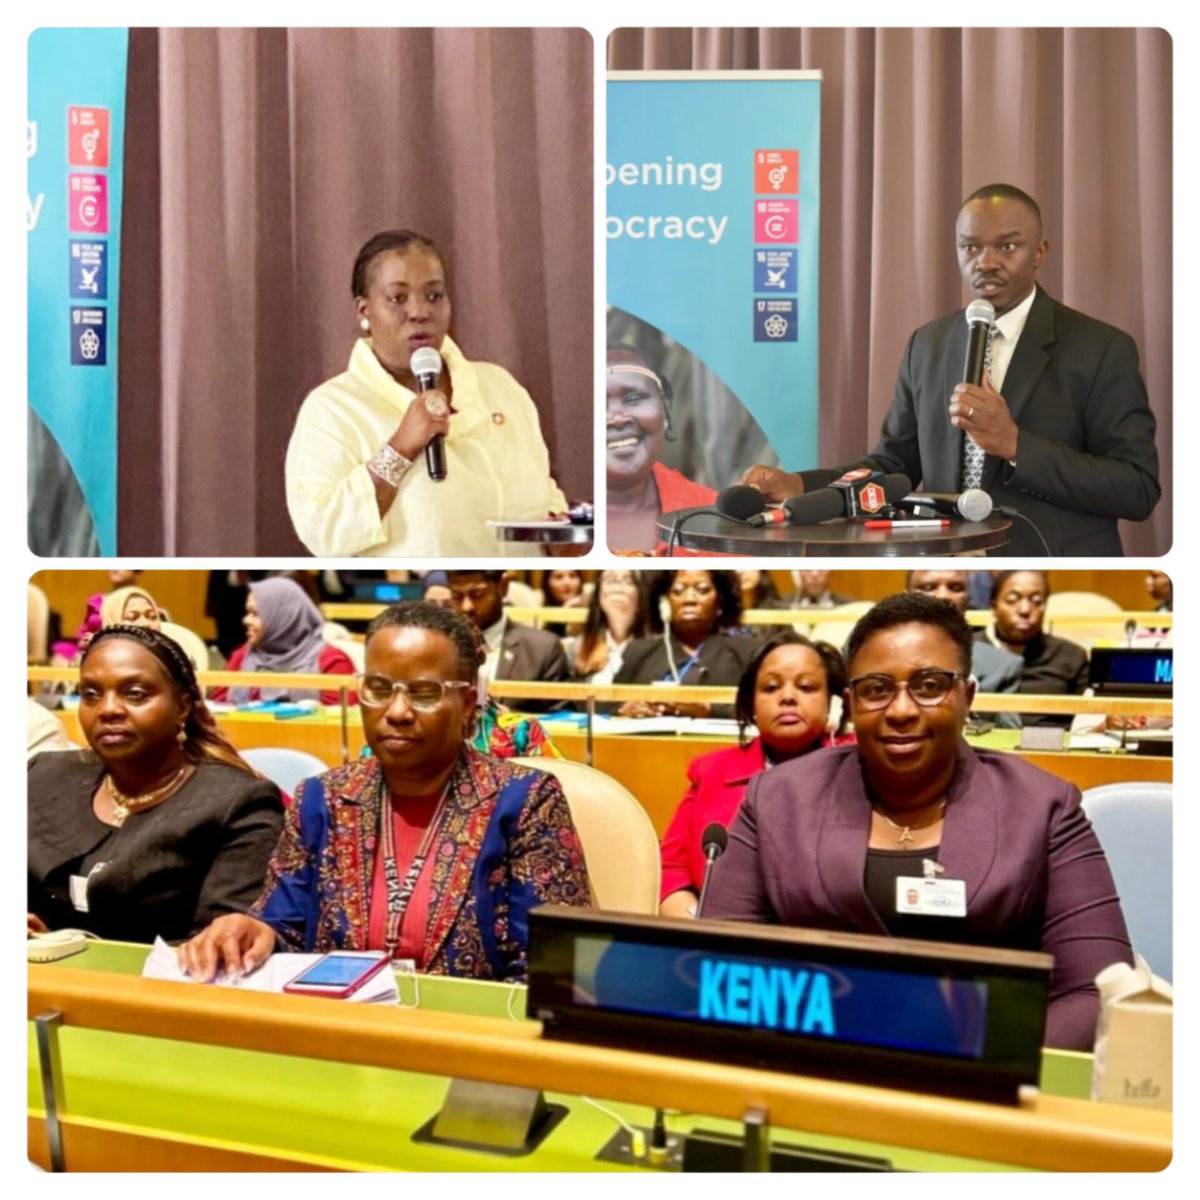 Women's political participation is crucial for inclusive #governance. Today, @unwomenkenya launched a “Political Economy Analysis on Women Political Participation” affirming that, when women are politically engaged, voices are amplified & policies address the needs of all. #SDG5